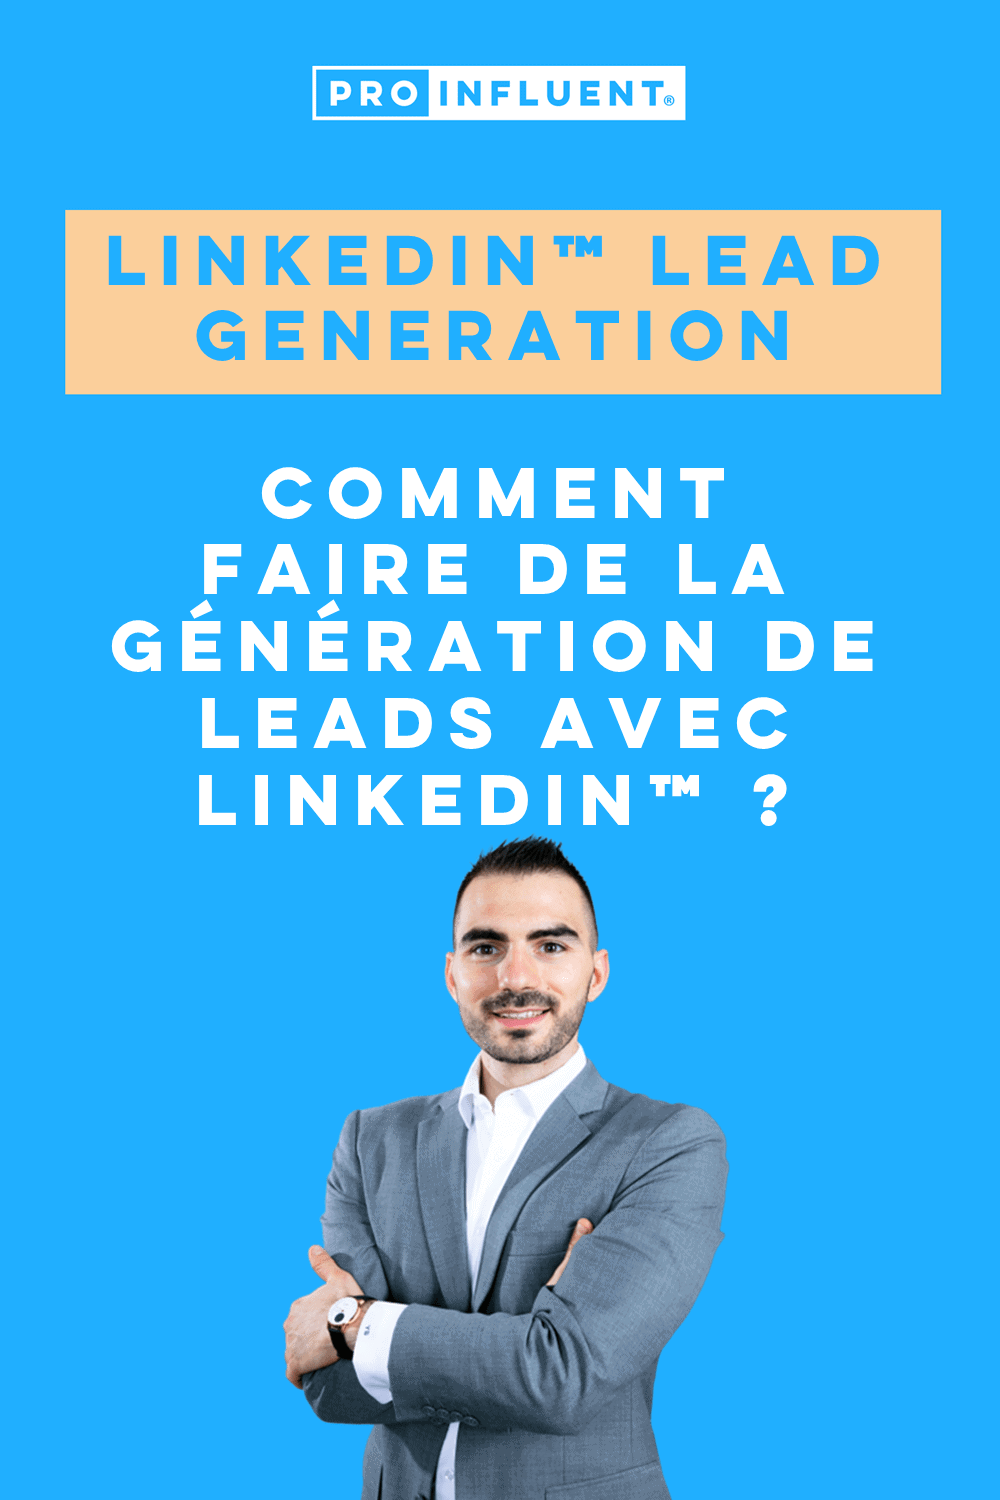 LinkedIn™ lead generation: how to generate leads with LinkedIn™?